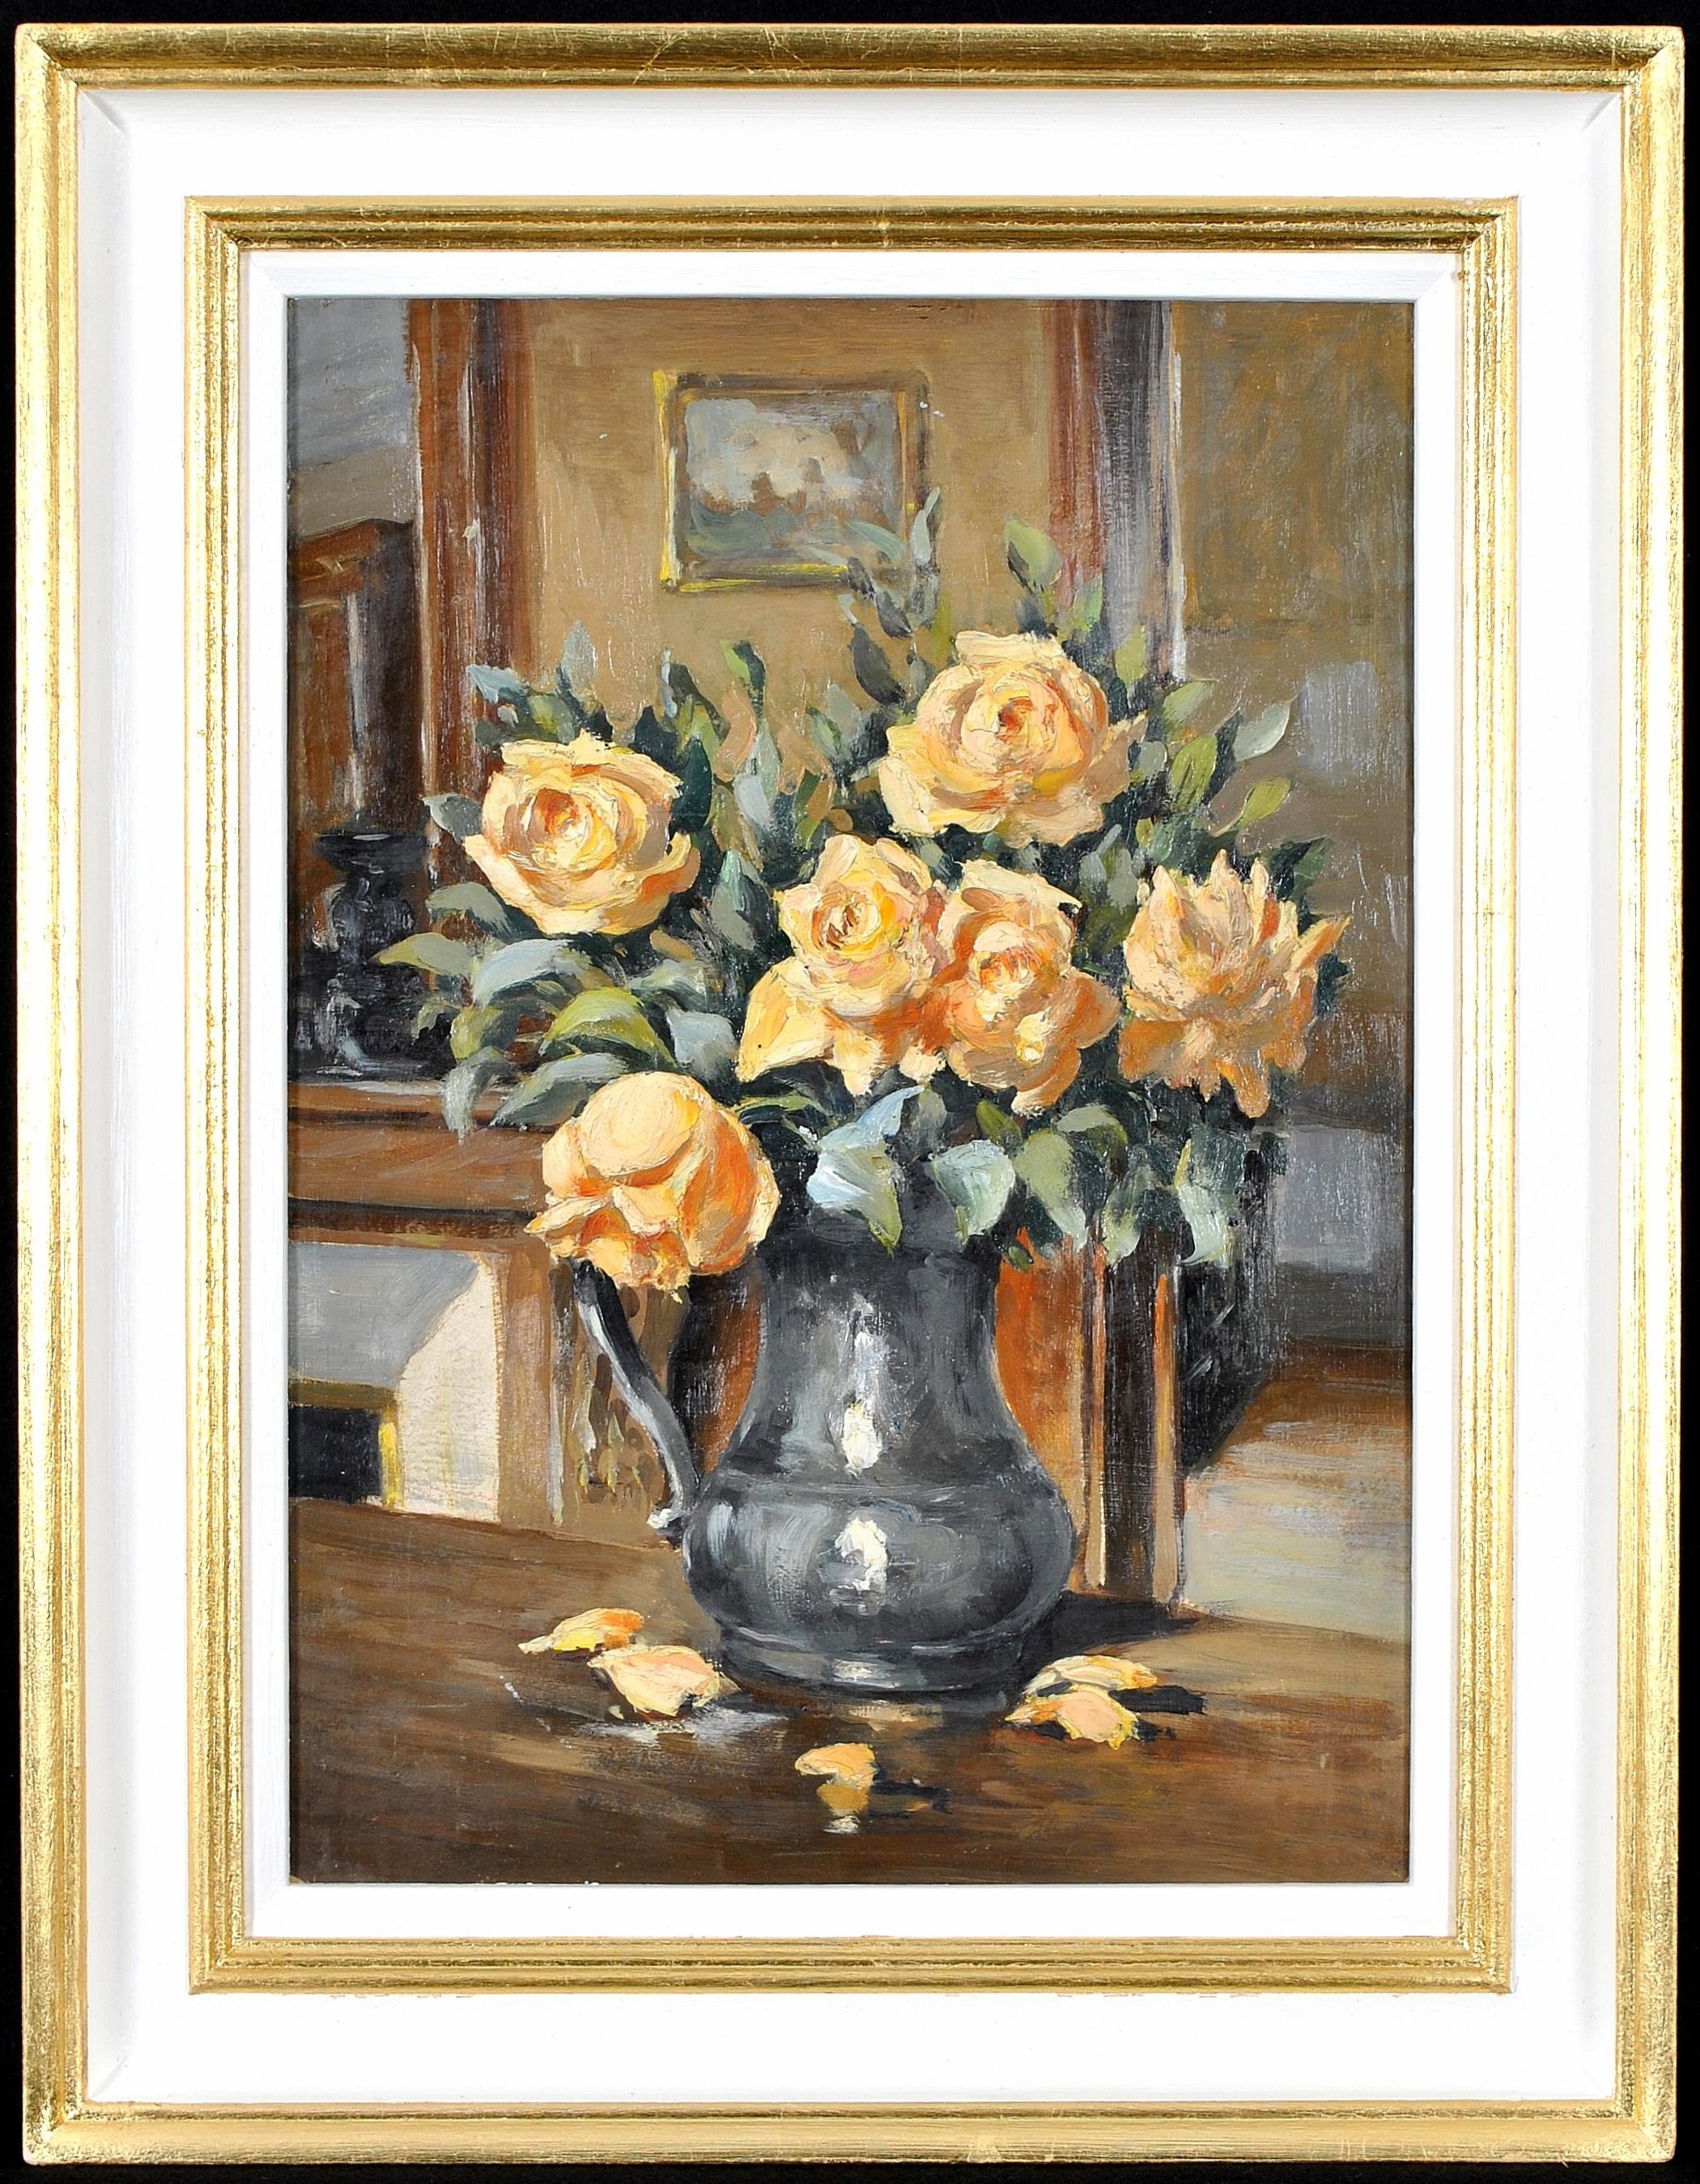 Early 20th Century French School Still-Life Painting - Roses in a Jug - 1920's French Impressionist Antique Still Life Oil Painting